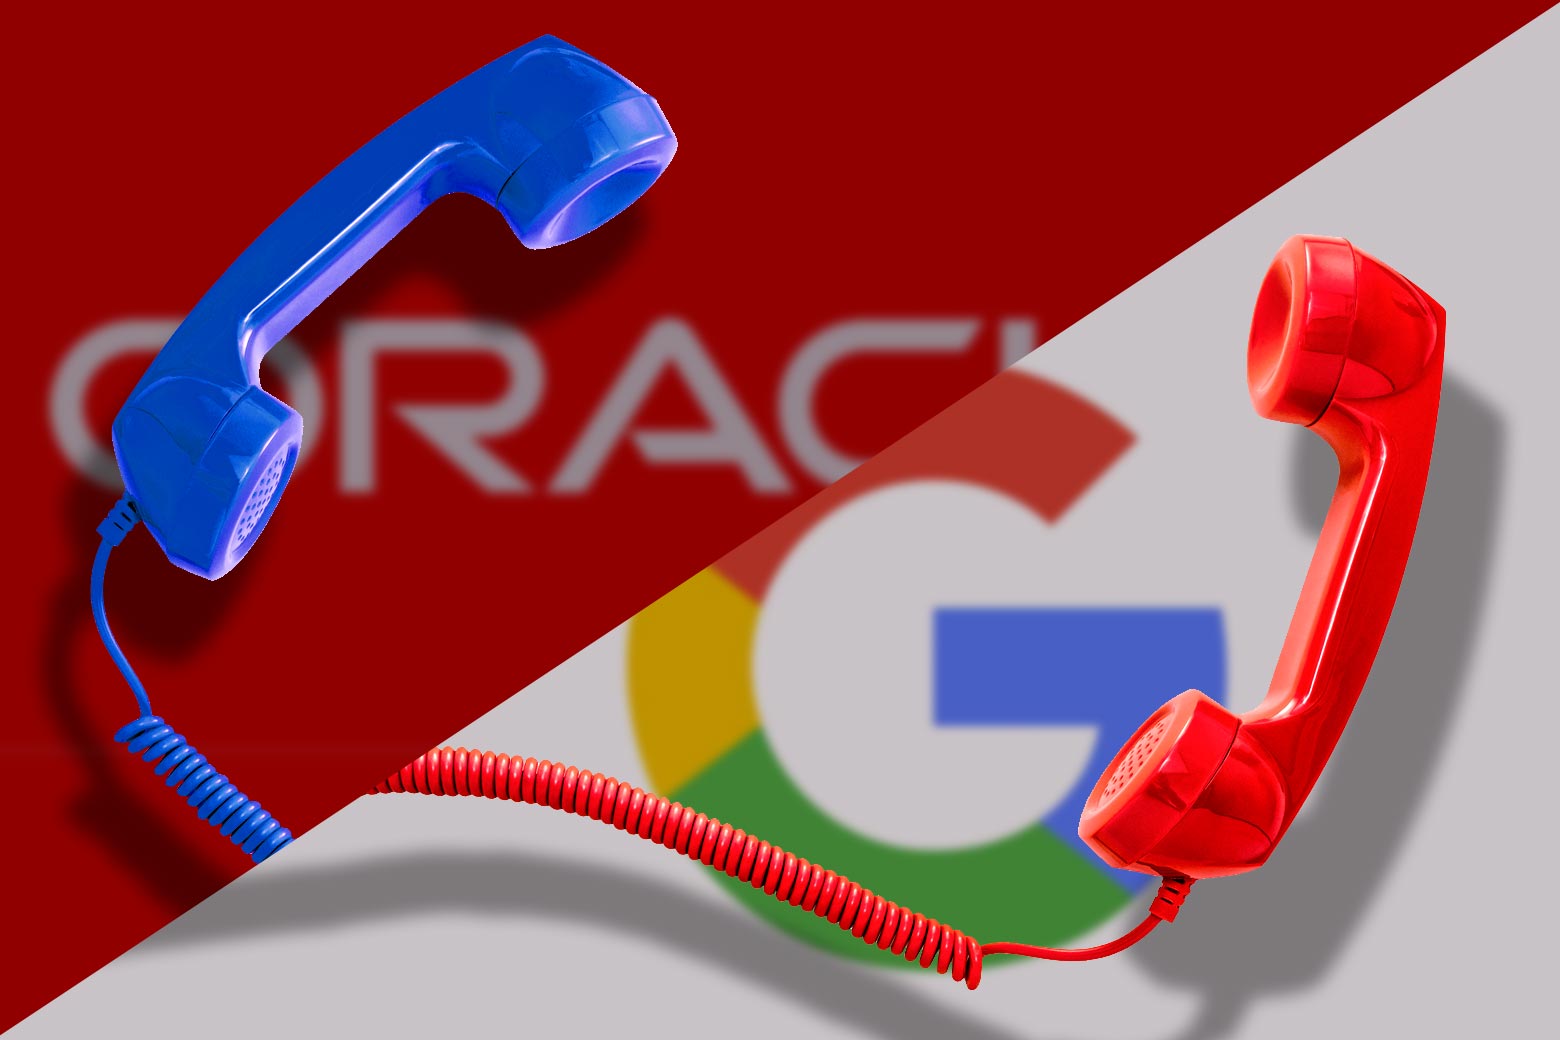 Split screen of phone receivers with the Oracle and Google logos behind them.